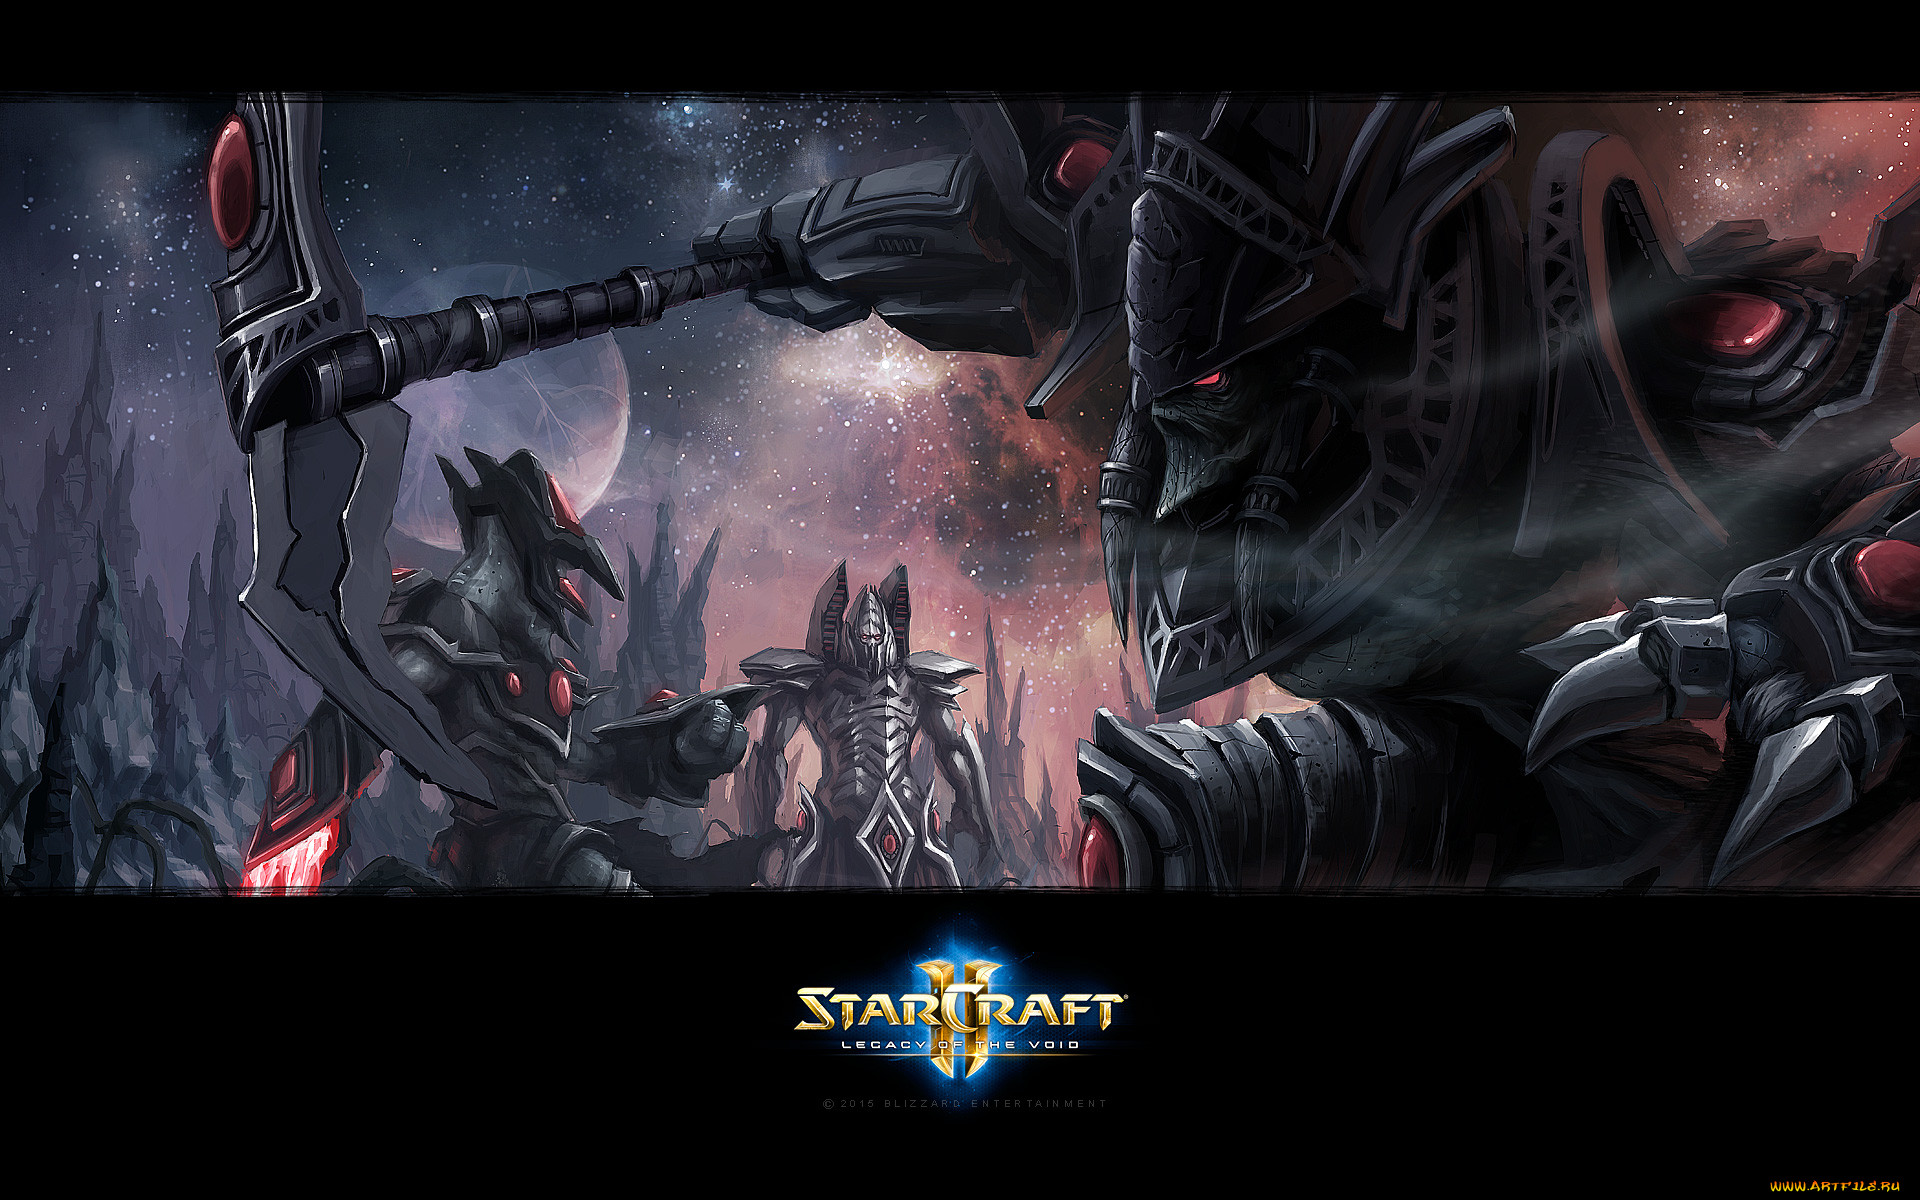  , starcraft ii,  legacy of void, action, , legacy, of, void, starcraft, ii